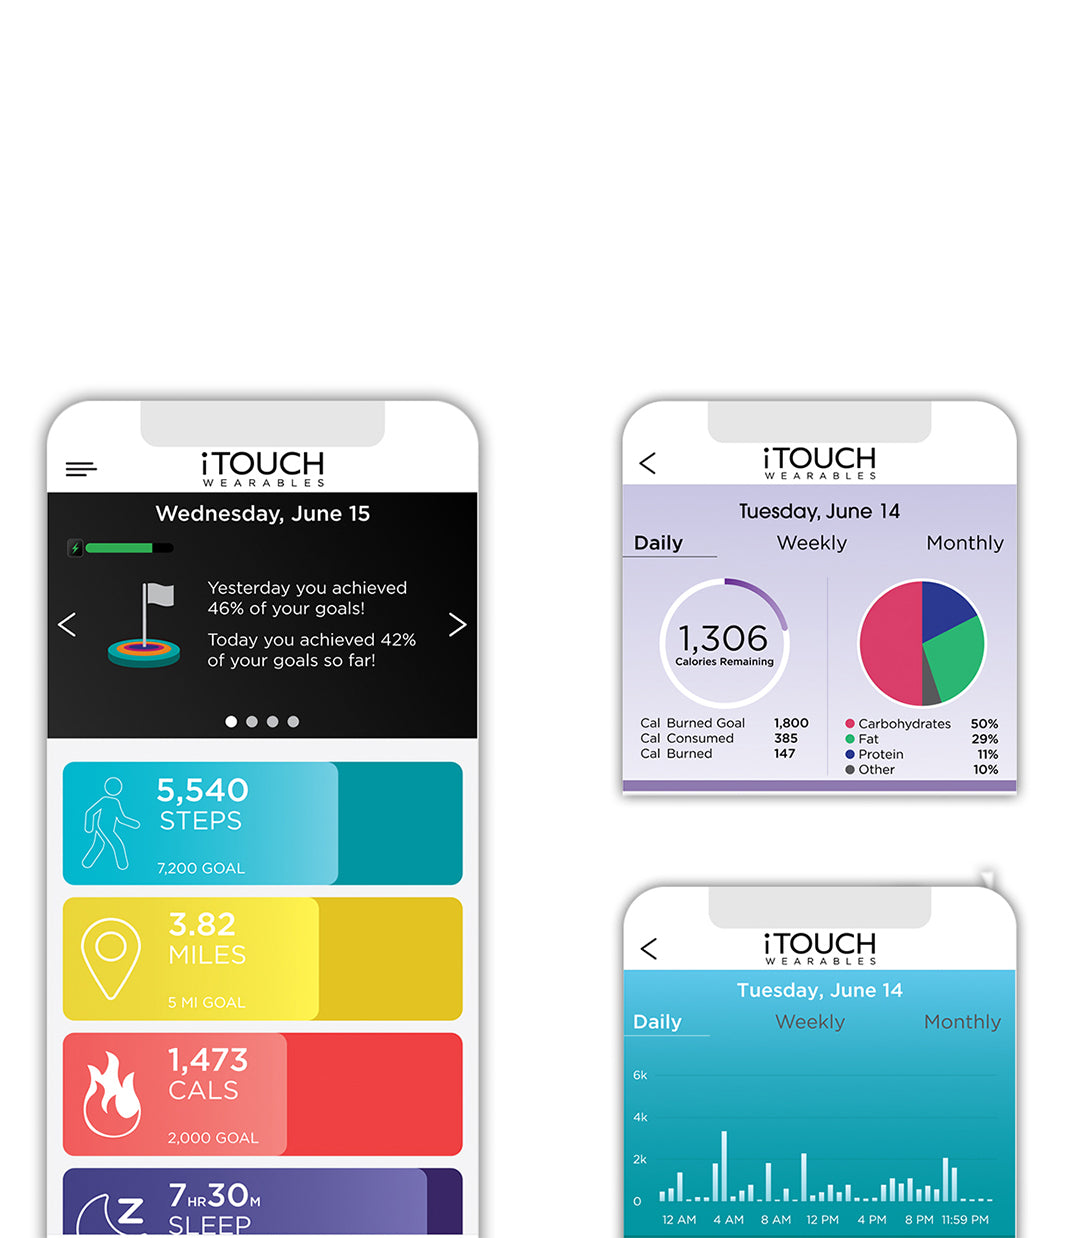 Easy to Use. The iTouch Wearables App